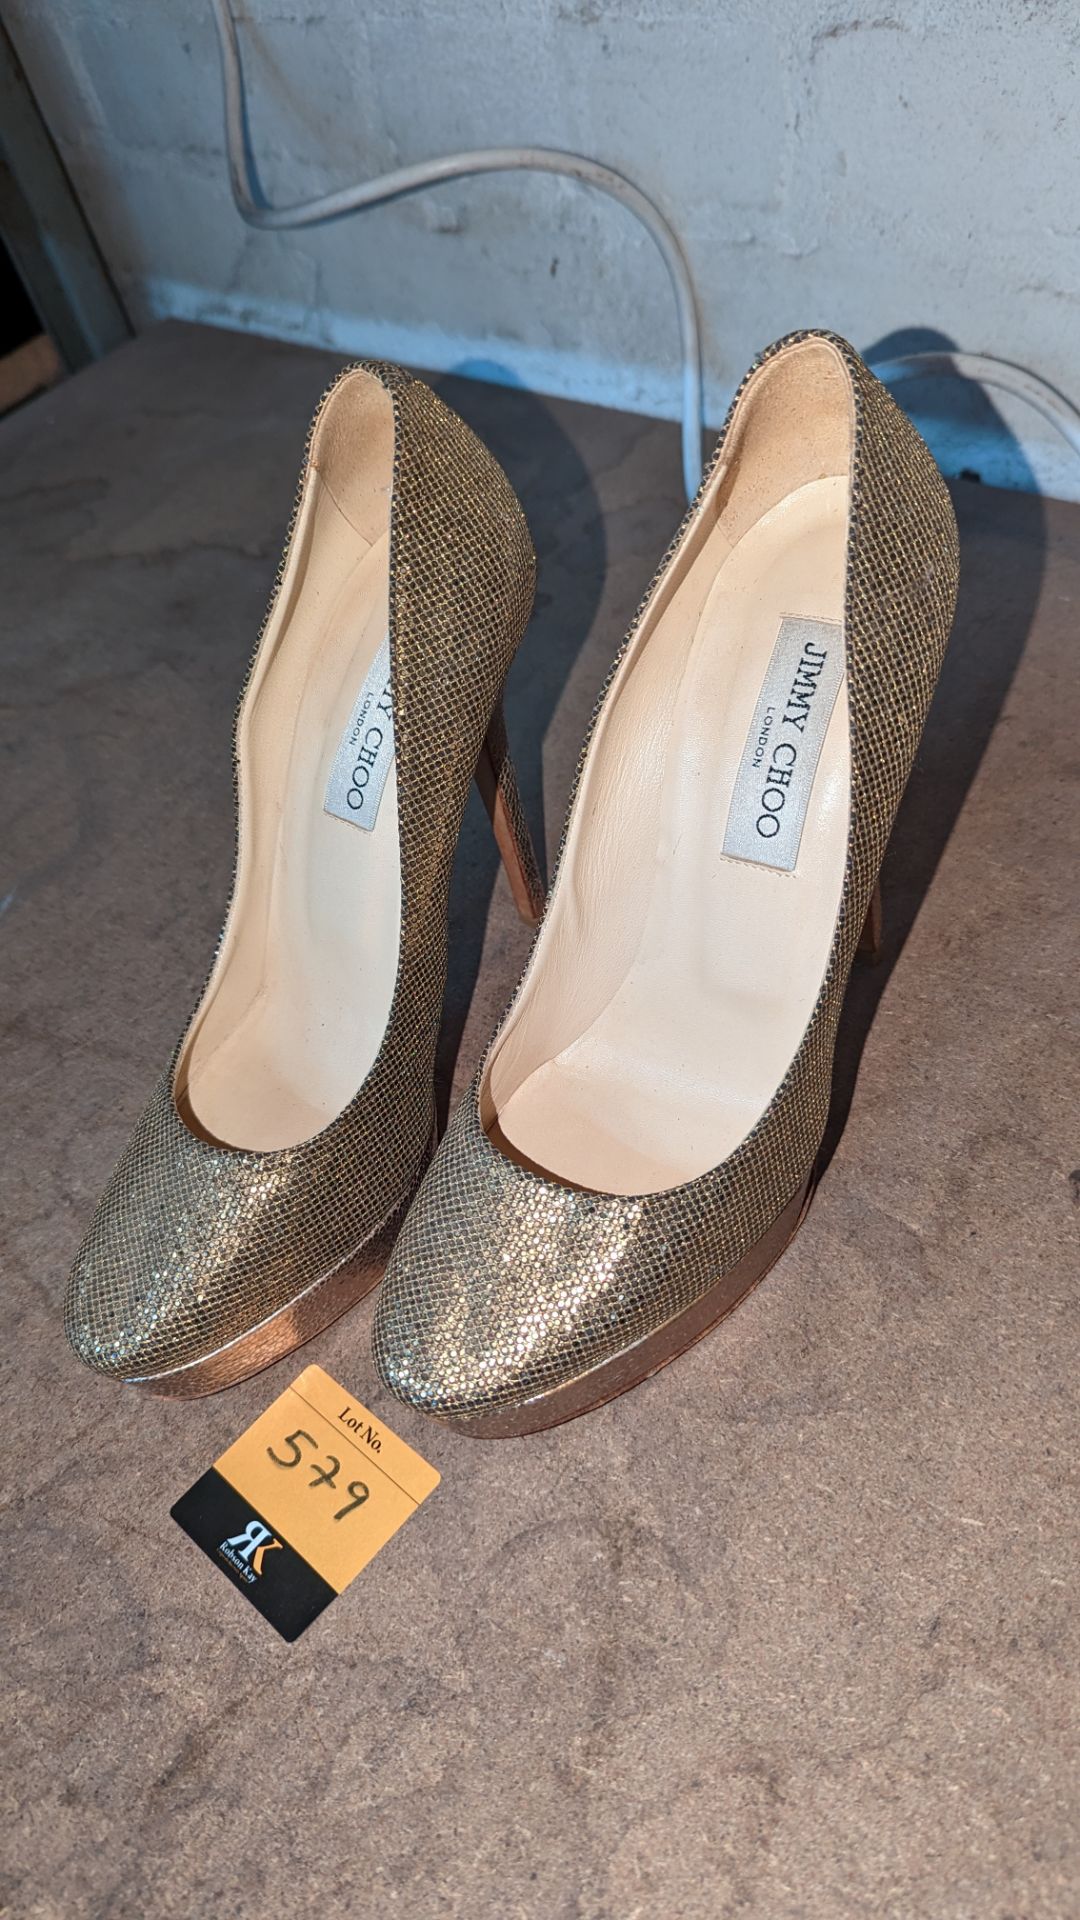 Pair of Jimmy Choo ladies shoes in gold, size 39